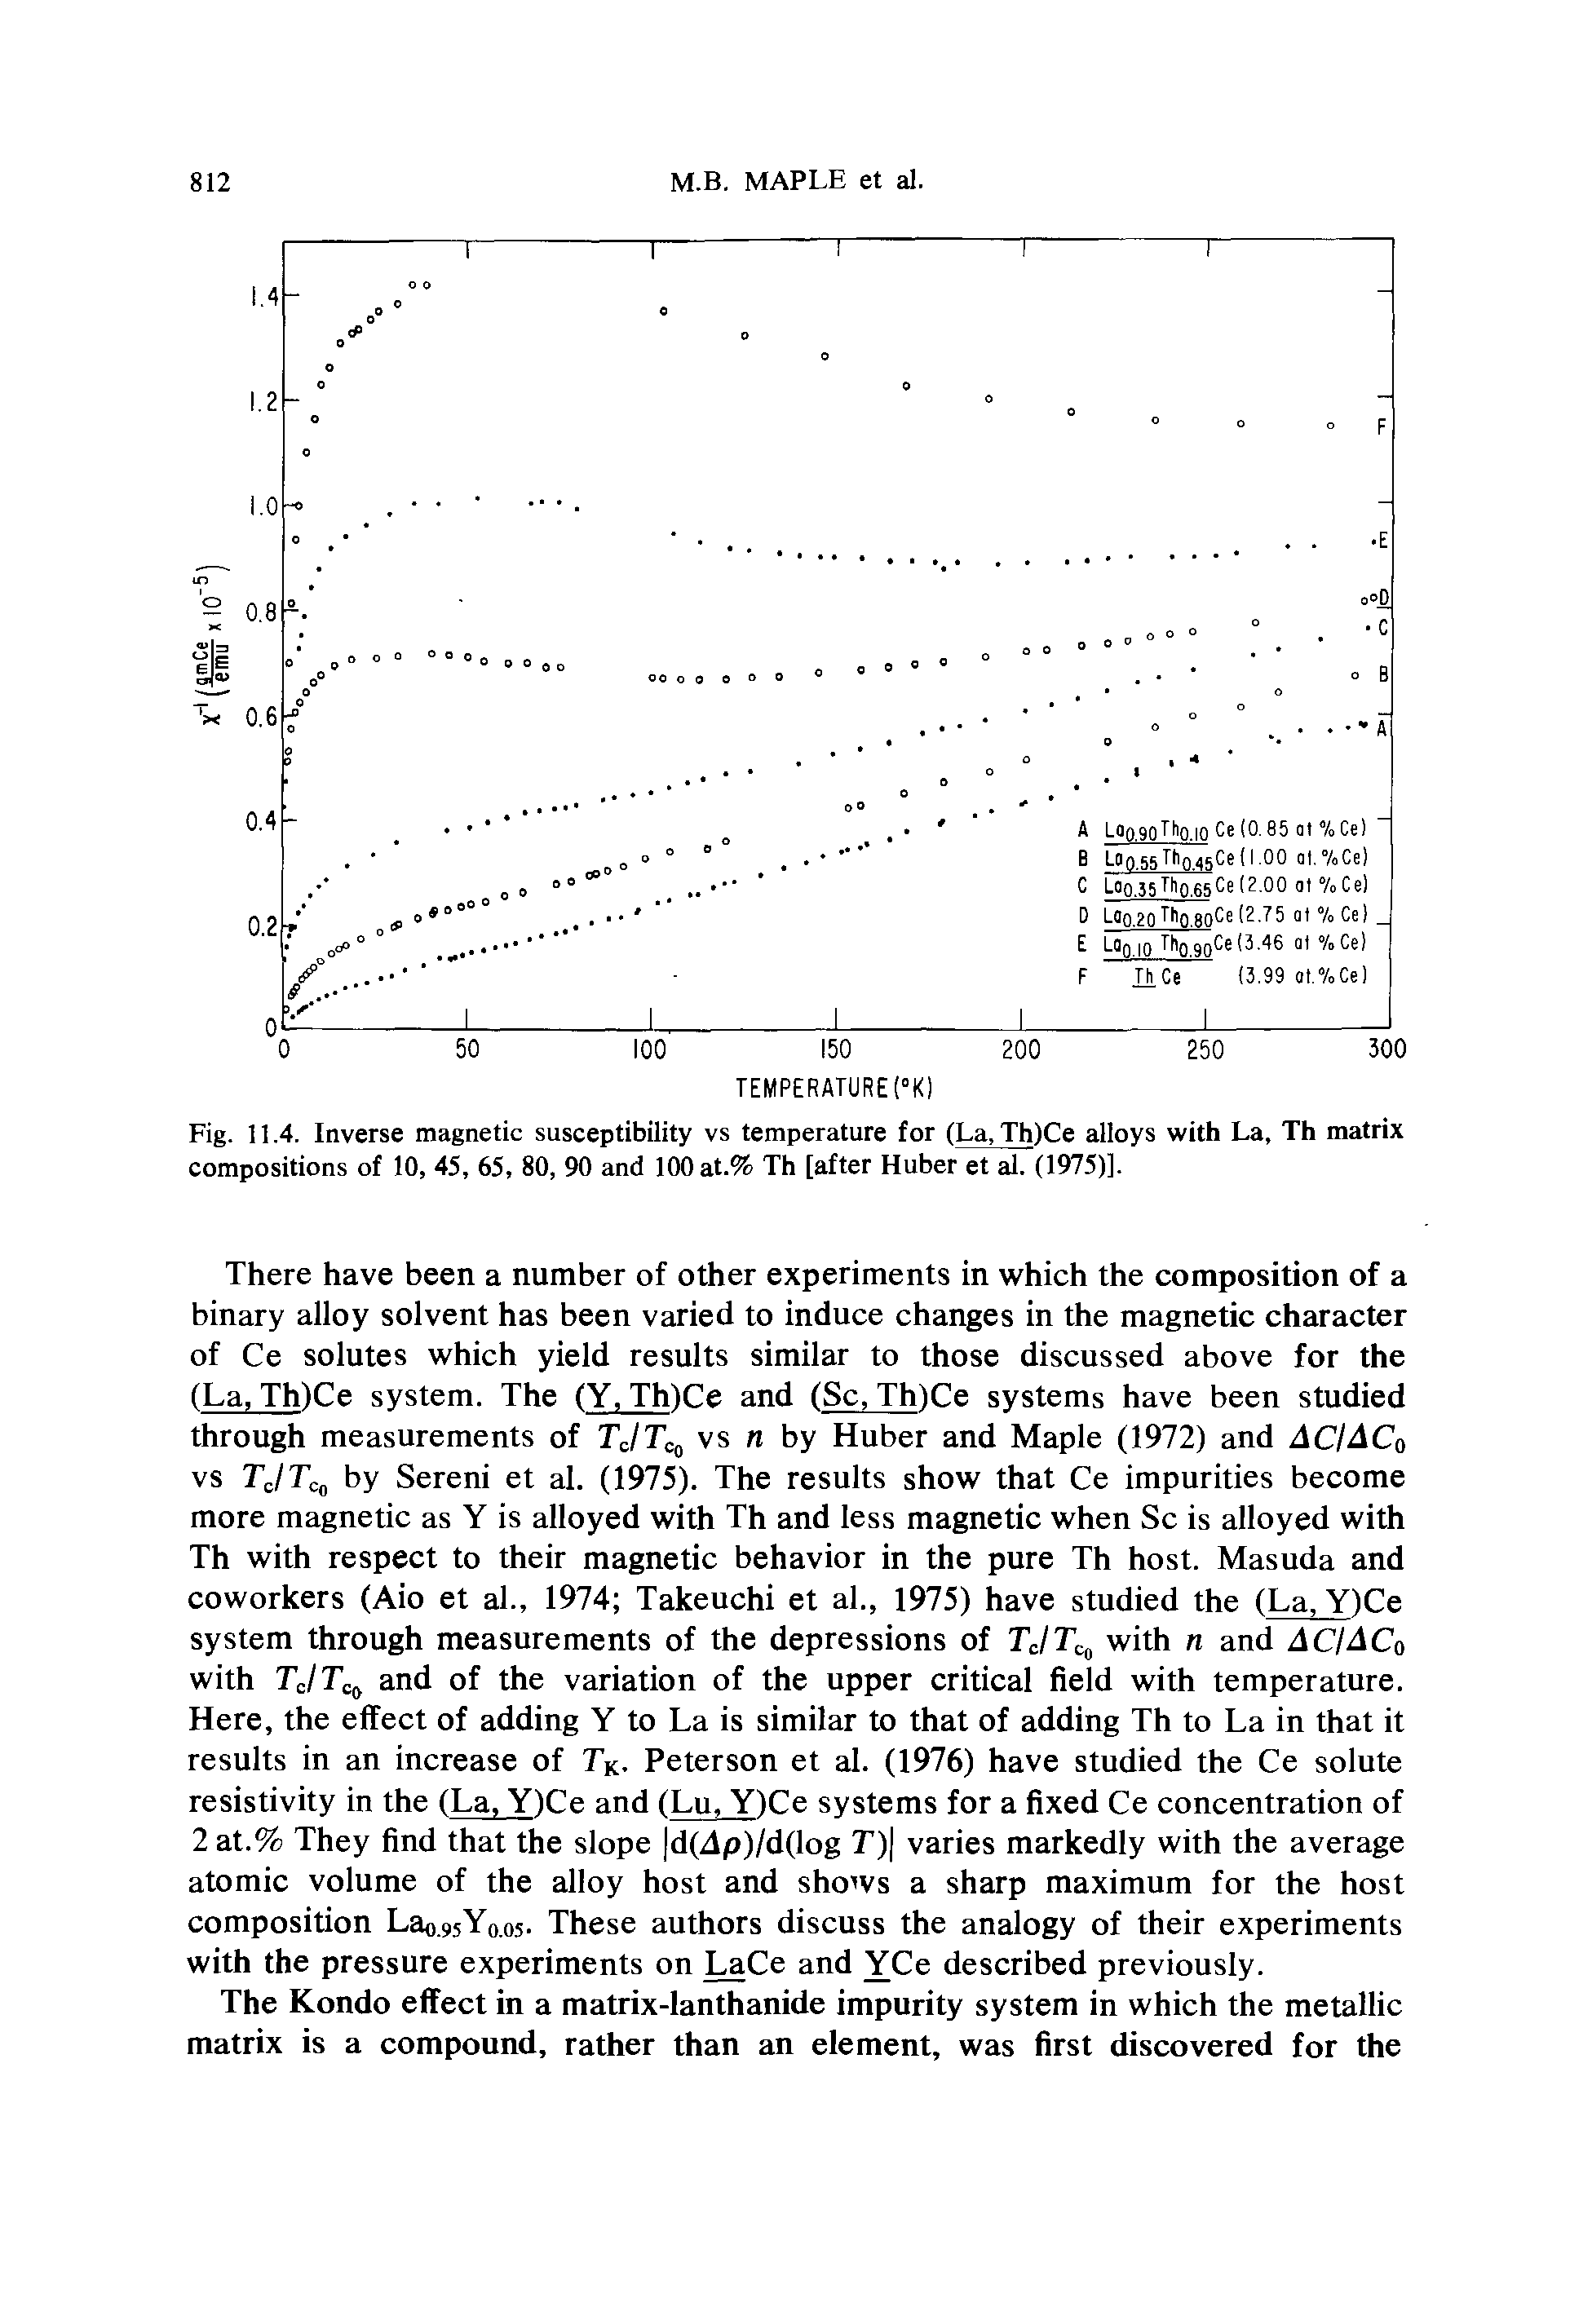 Fig. 11.4. Inverse magnetic susceptibility vs temperature for (La, Th)Ce alloys with La, Th matrix compositions of 10, 45, 65, 80, 90 and lOOat.% Th [after Huber et al. (1975)].